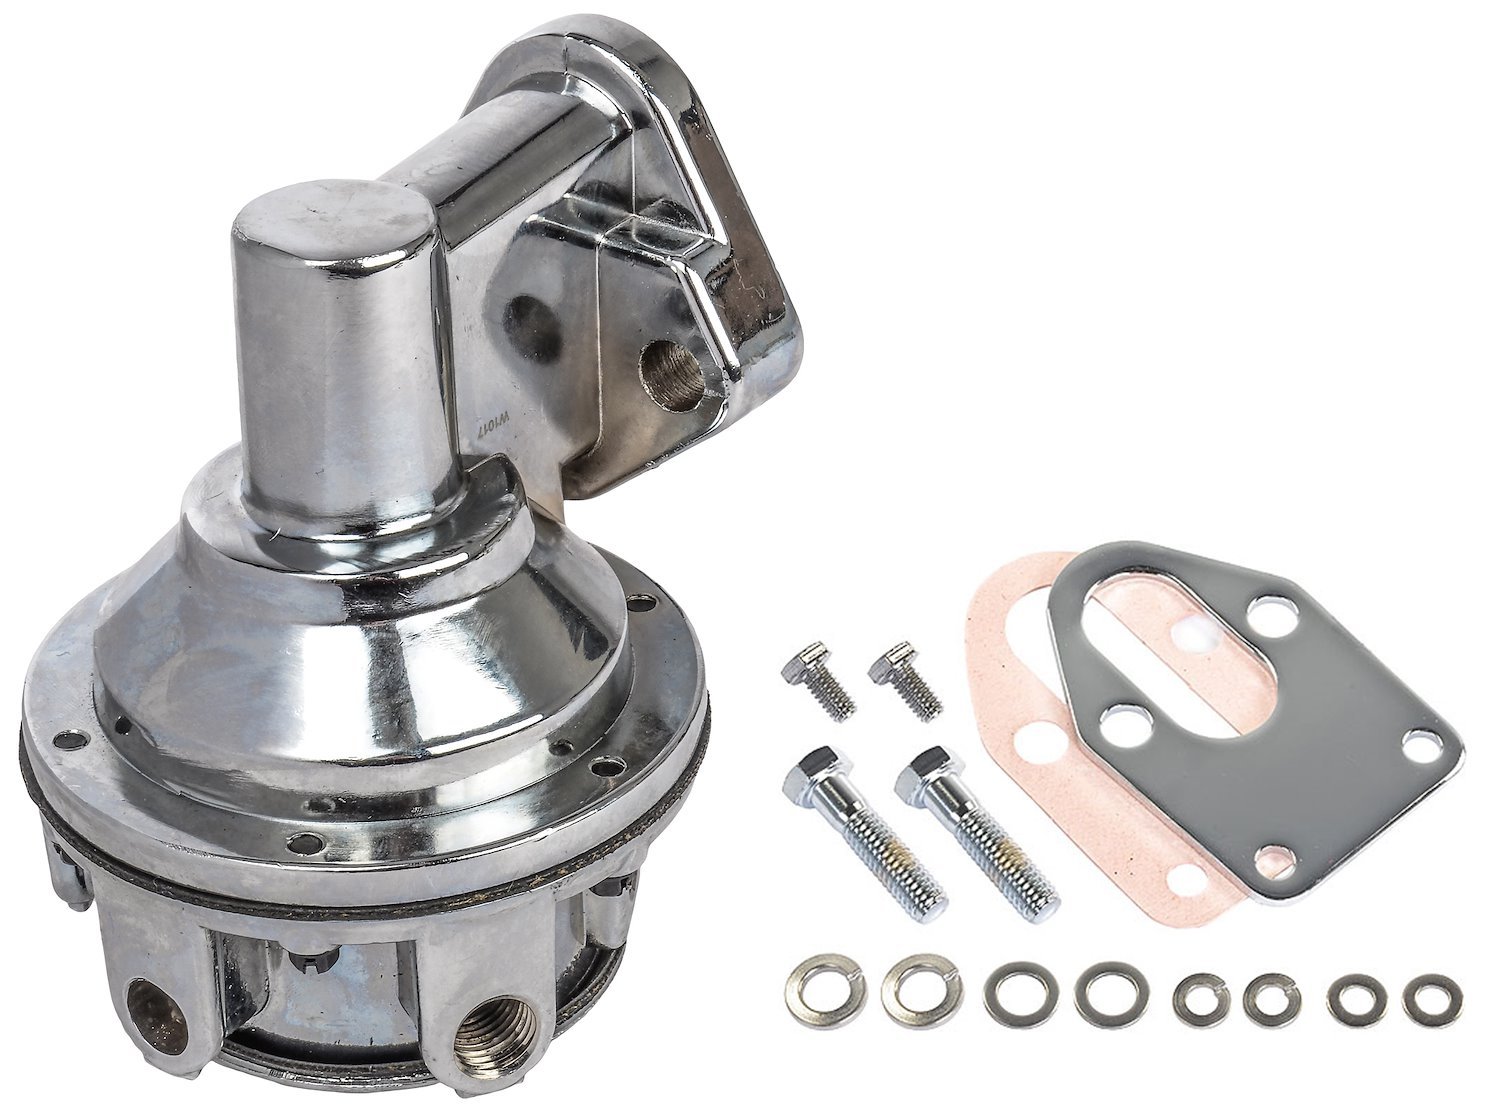 Fuel Pump and Mount Plate Kit for Small Block Chevy 265-283-327-350-400 [80 gph, Chrome]